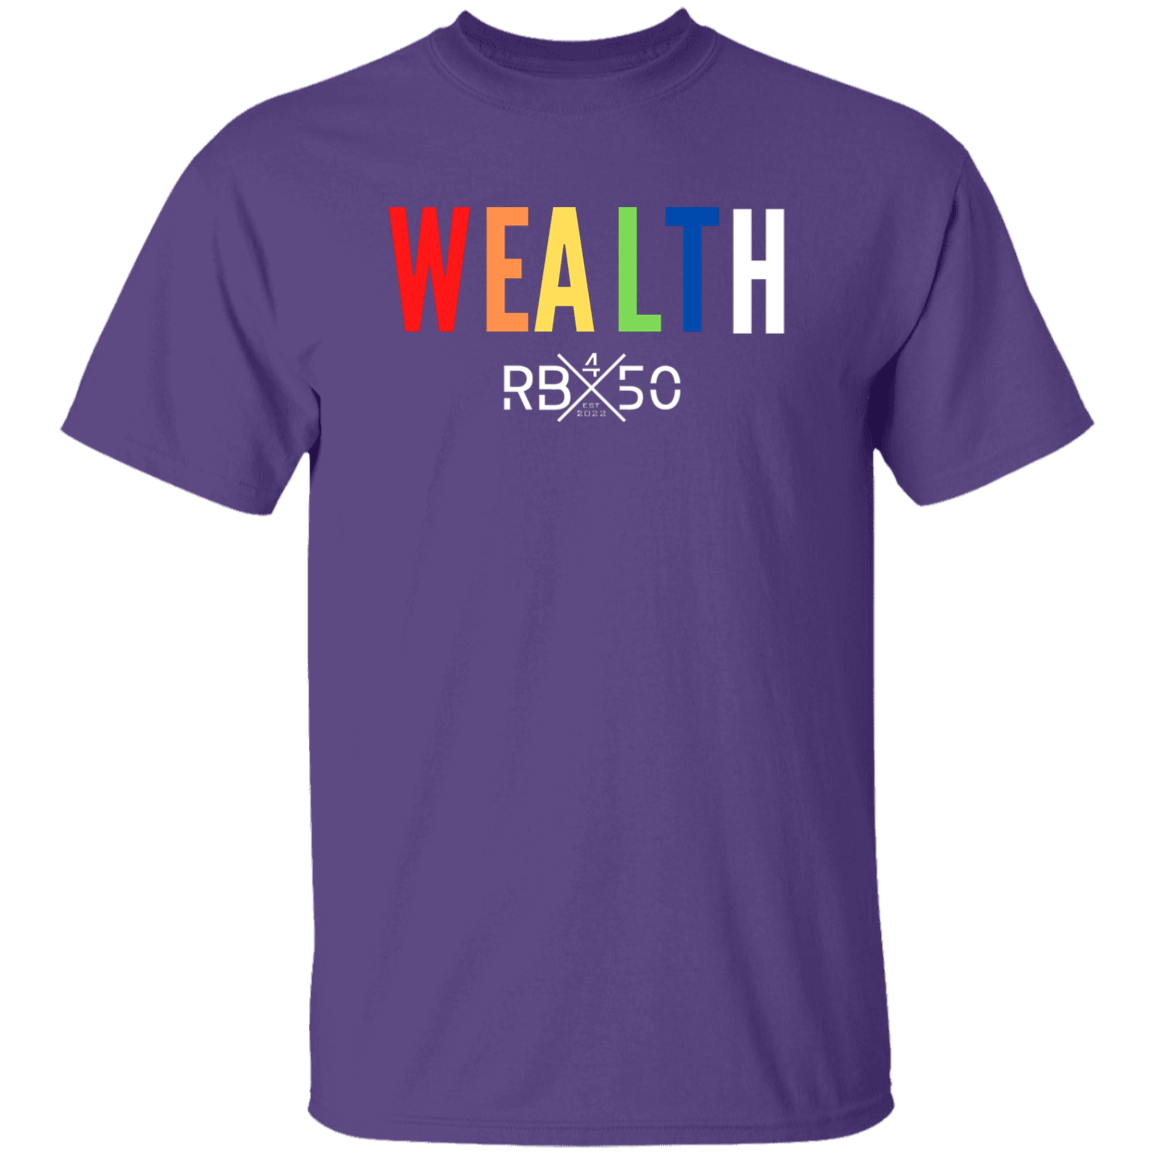 RB450 WEALTH Youth 5.3 oz 100% Cotton T-Shirt